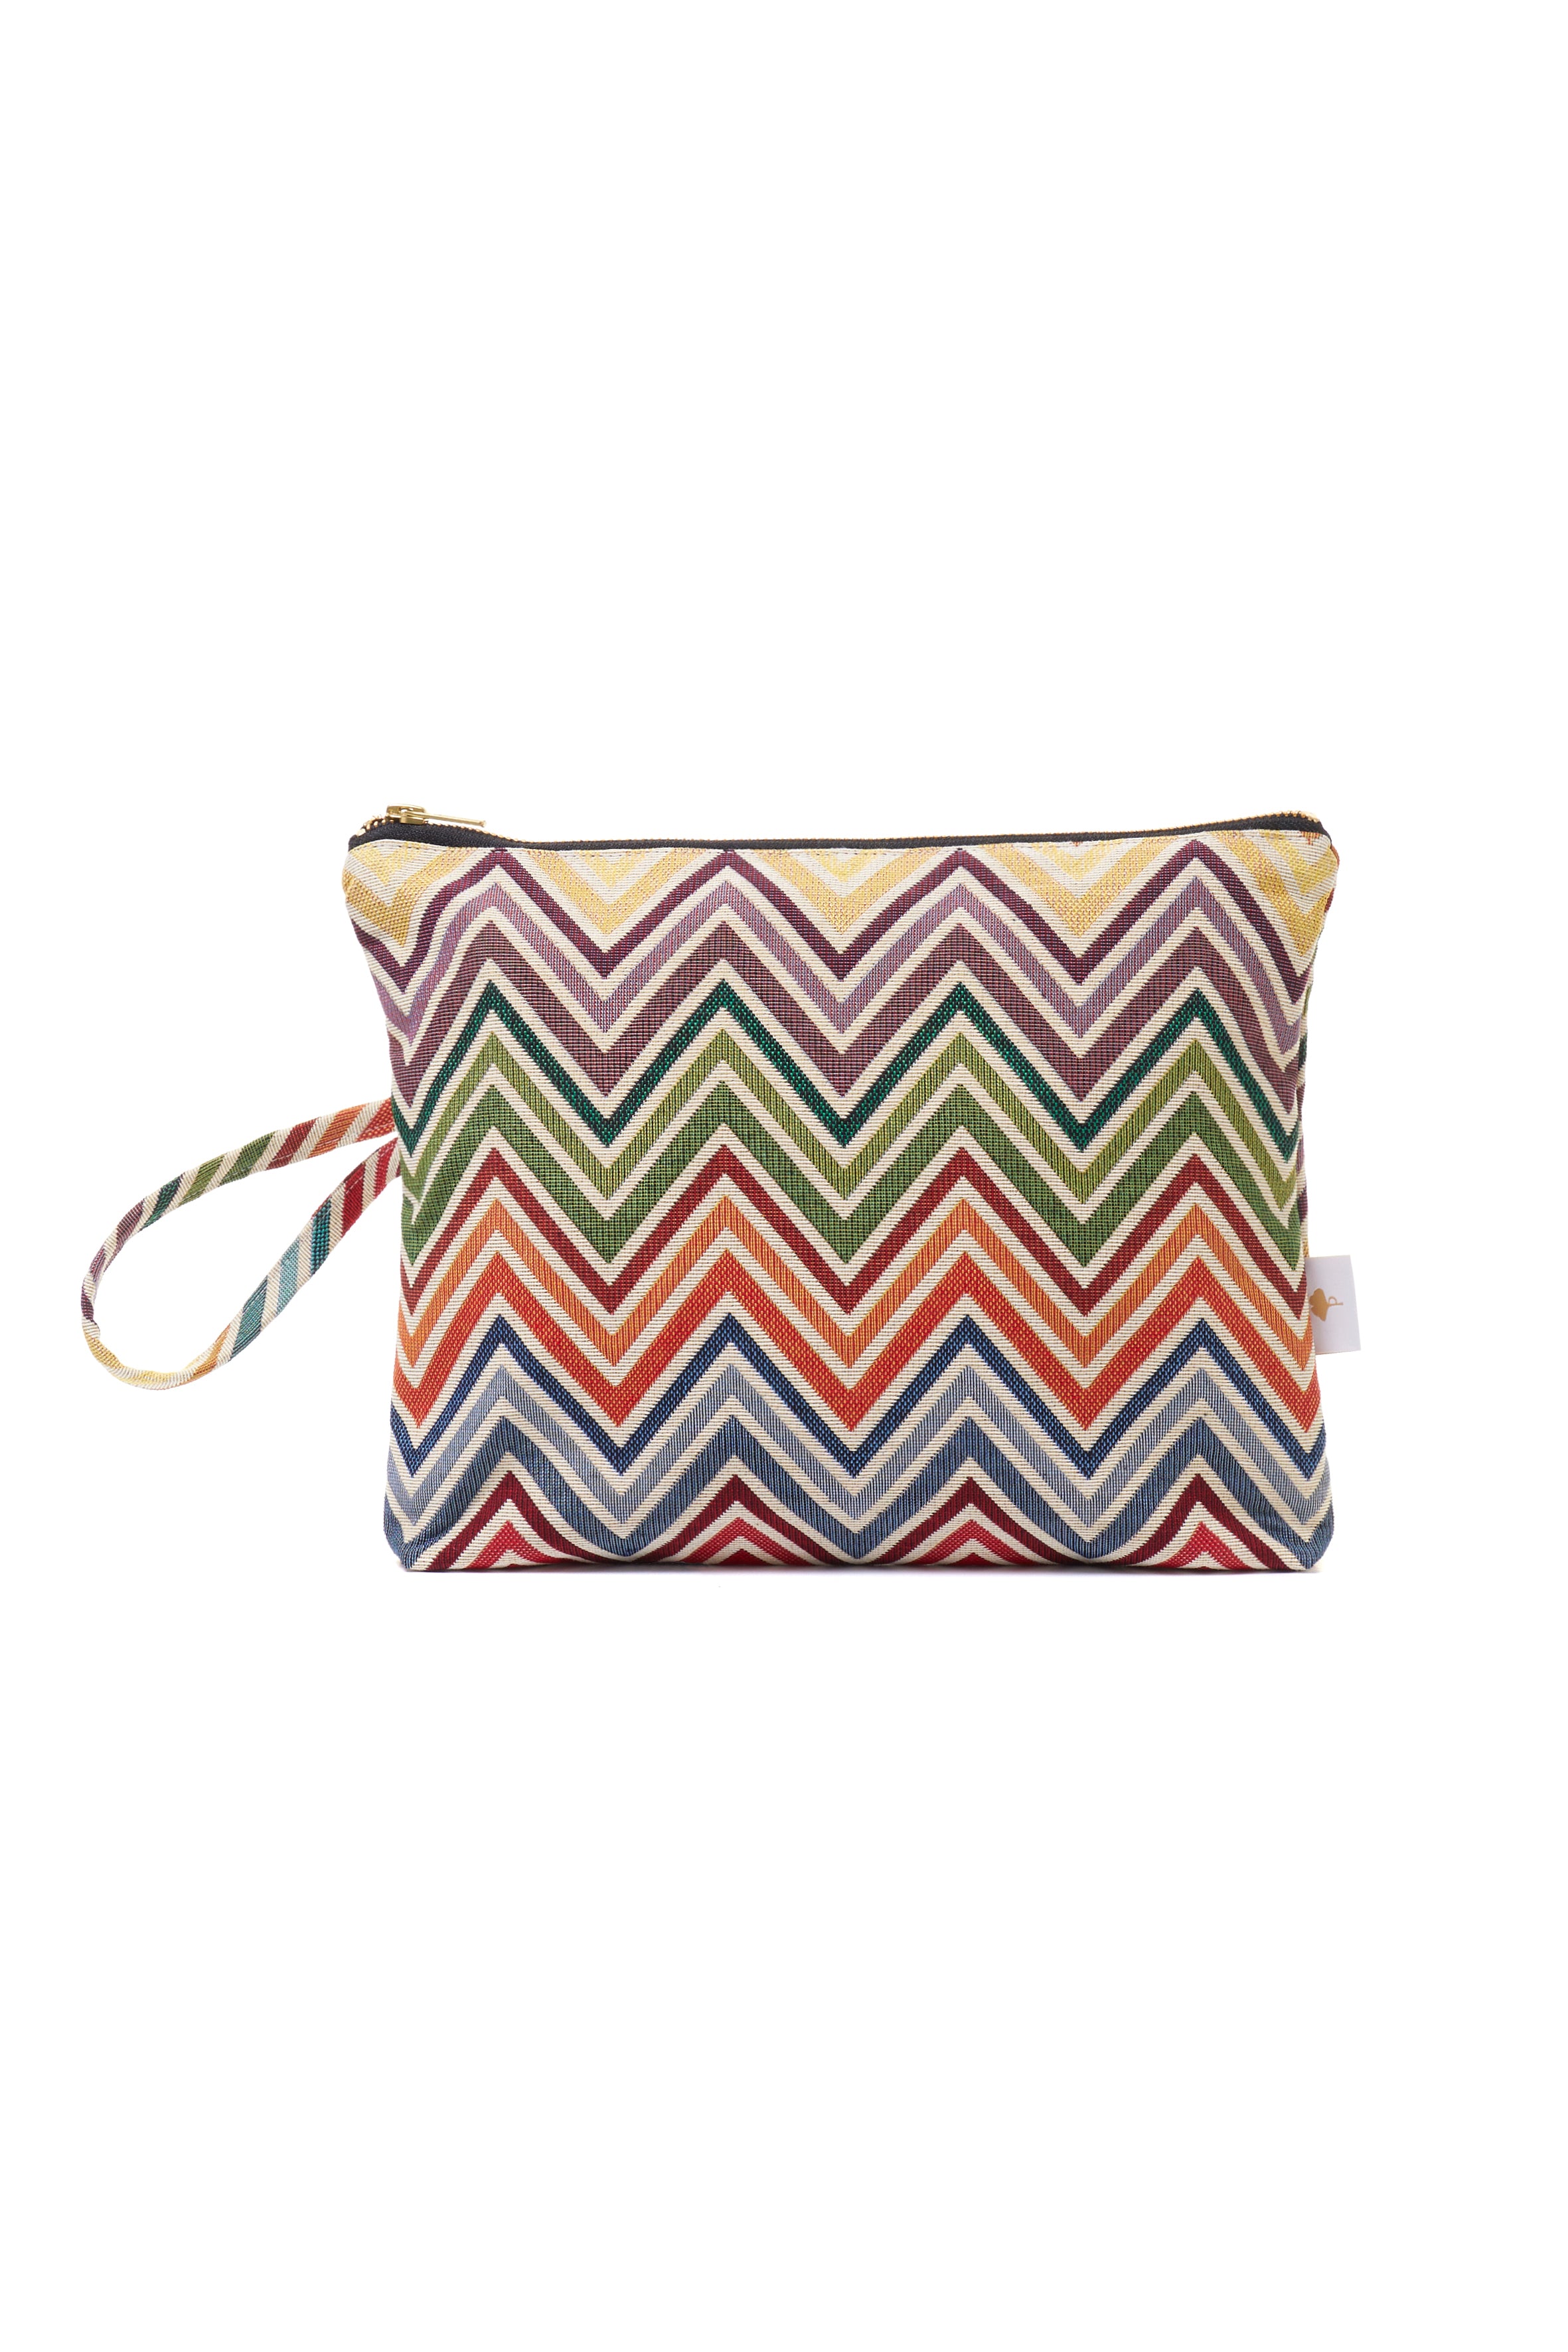 TRAVEL POUCH LARGE - ZIGZAG